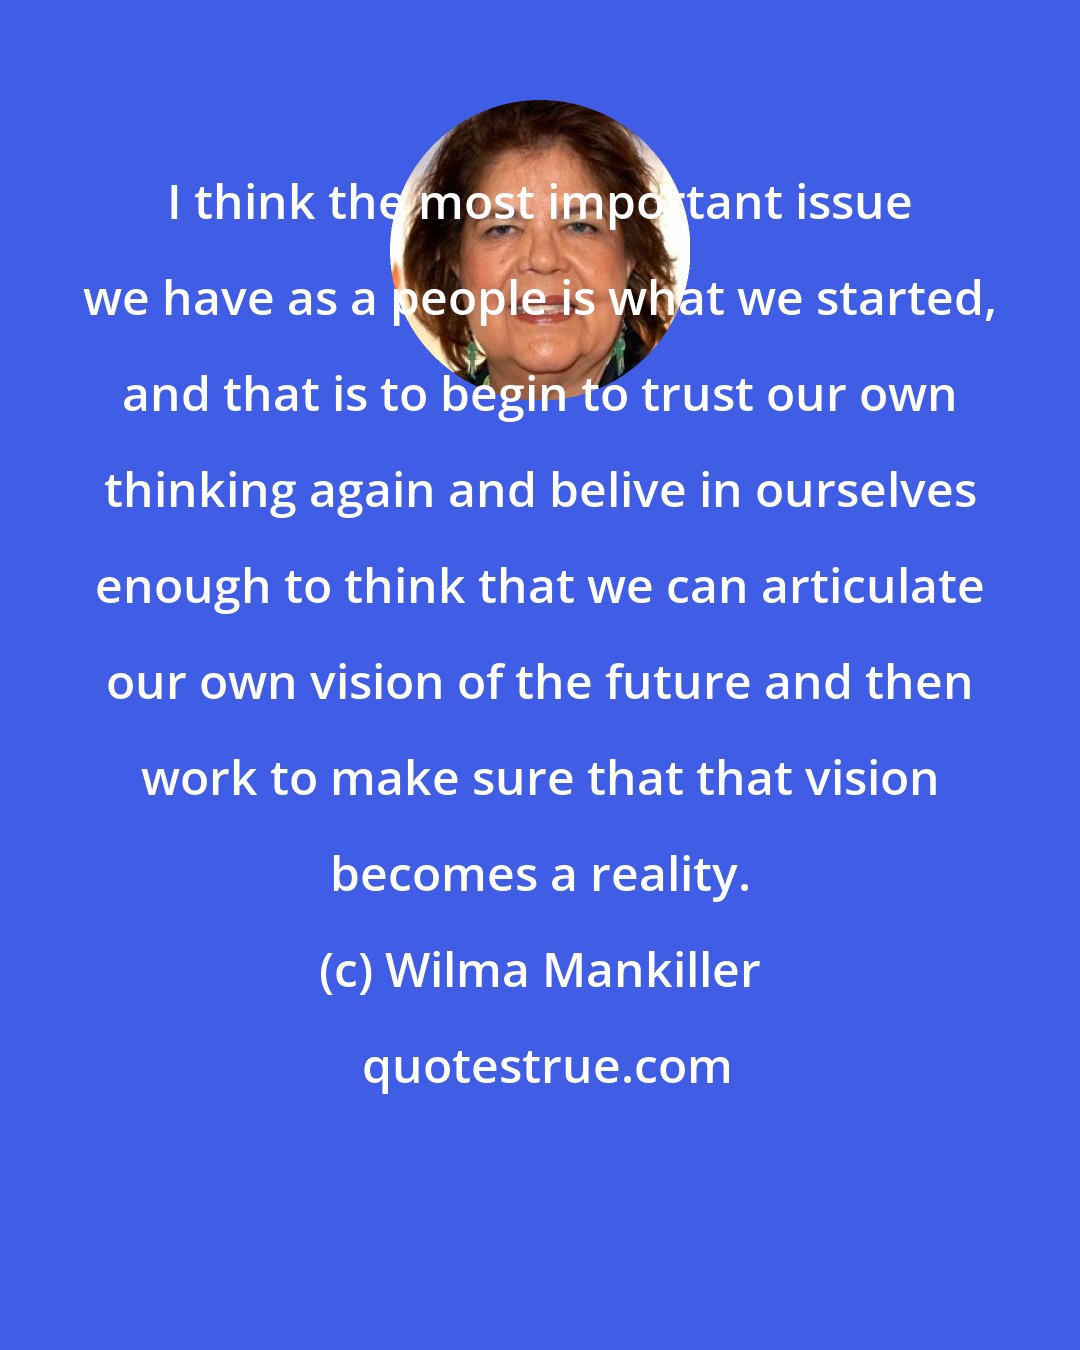 Wilma Mankiller: I think the most important issue we have as a people is what we started, and that is to begin to trust our own thinking again and belive in ourselves enough to think that we can articulate our own vision of the future and then work to make sure that that vision becomes a reality.